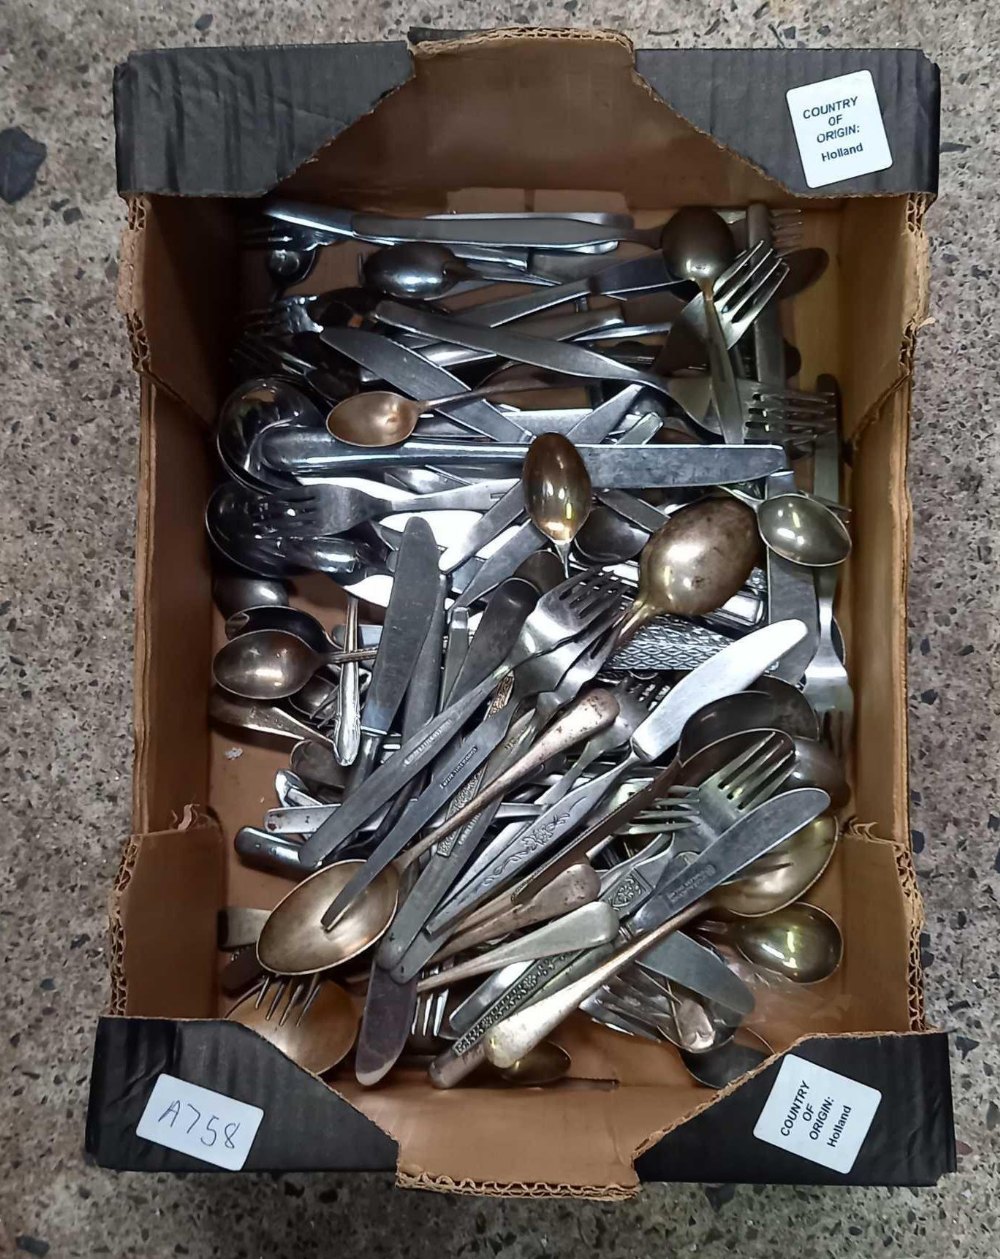 CARTON OF MAINLY STAINLESS STEEL CUTLERY